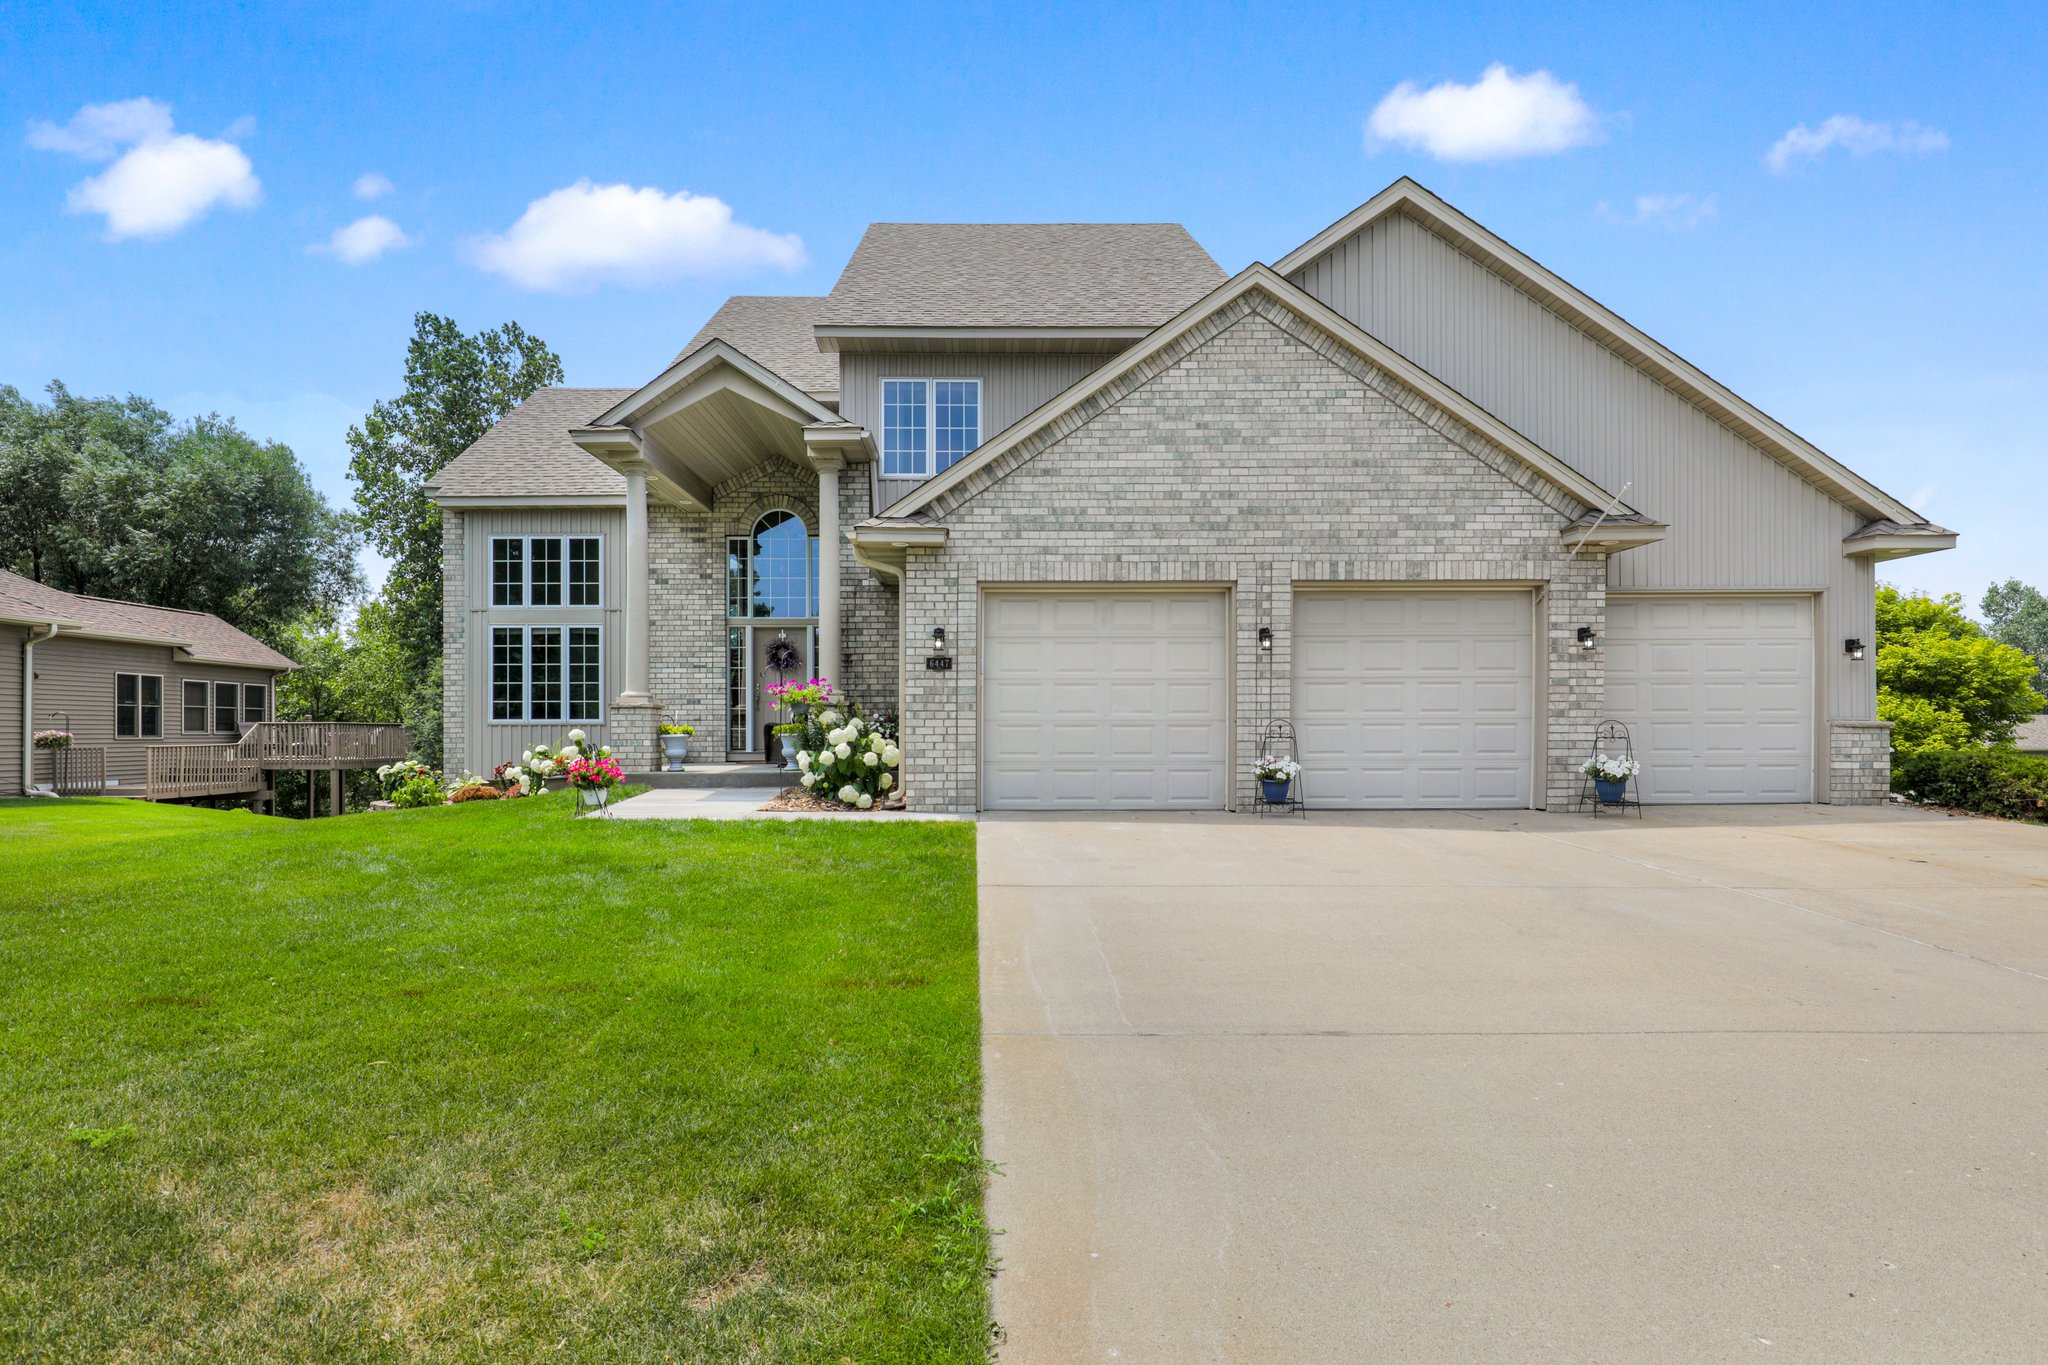 6447 N Trappers Crossing, Lino Lakes, MN 55038, USA Photo 4